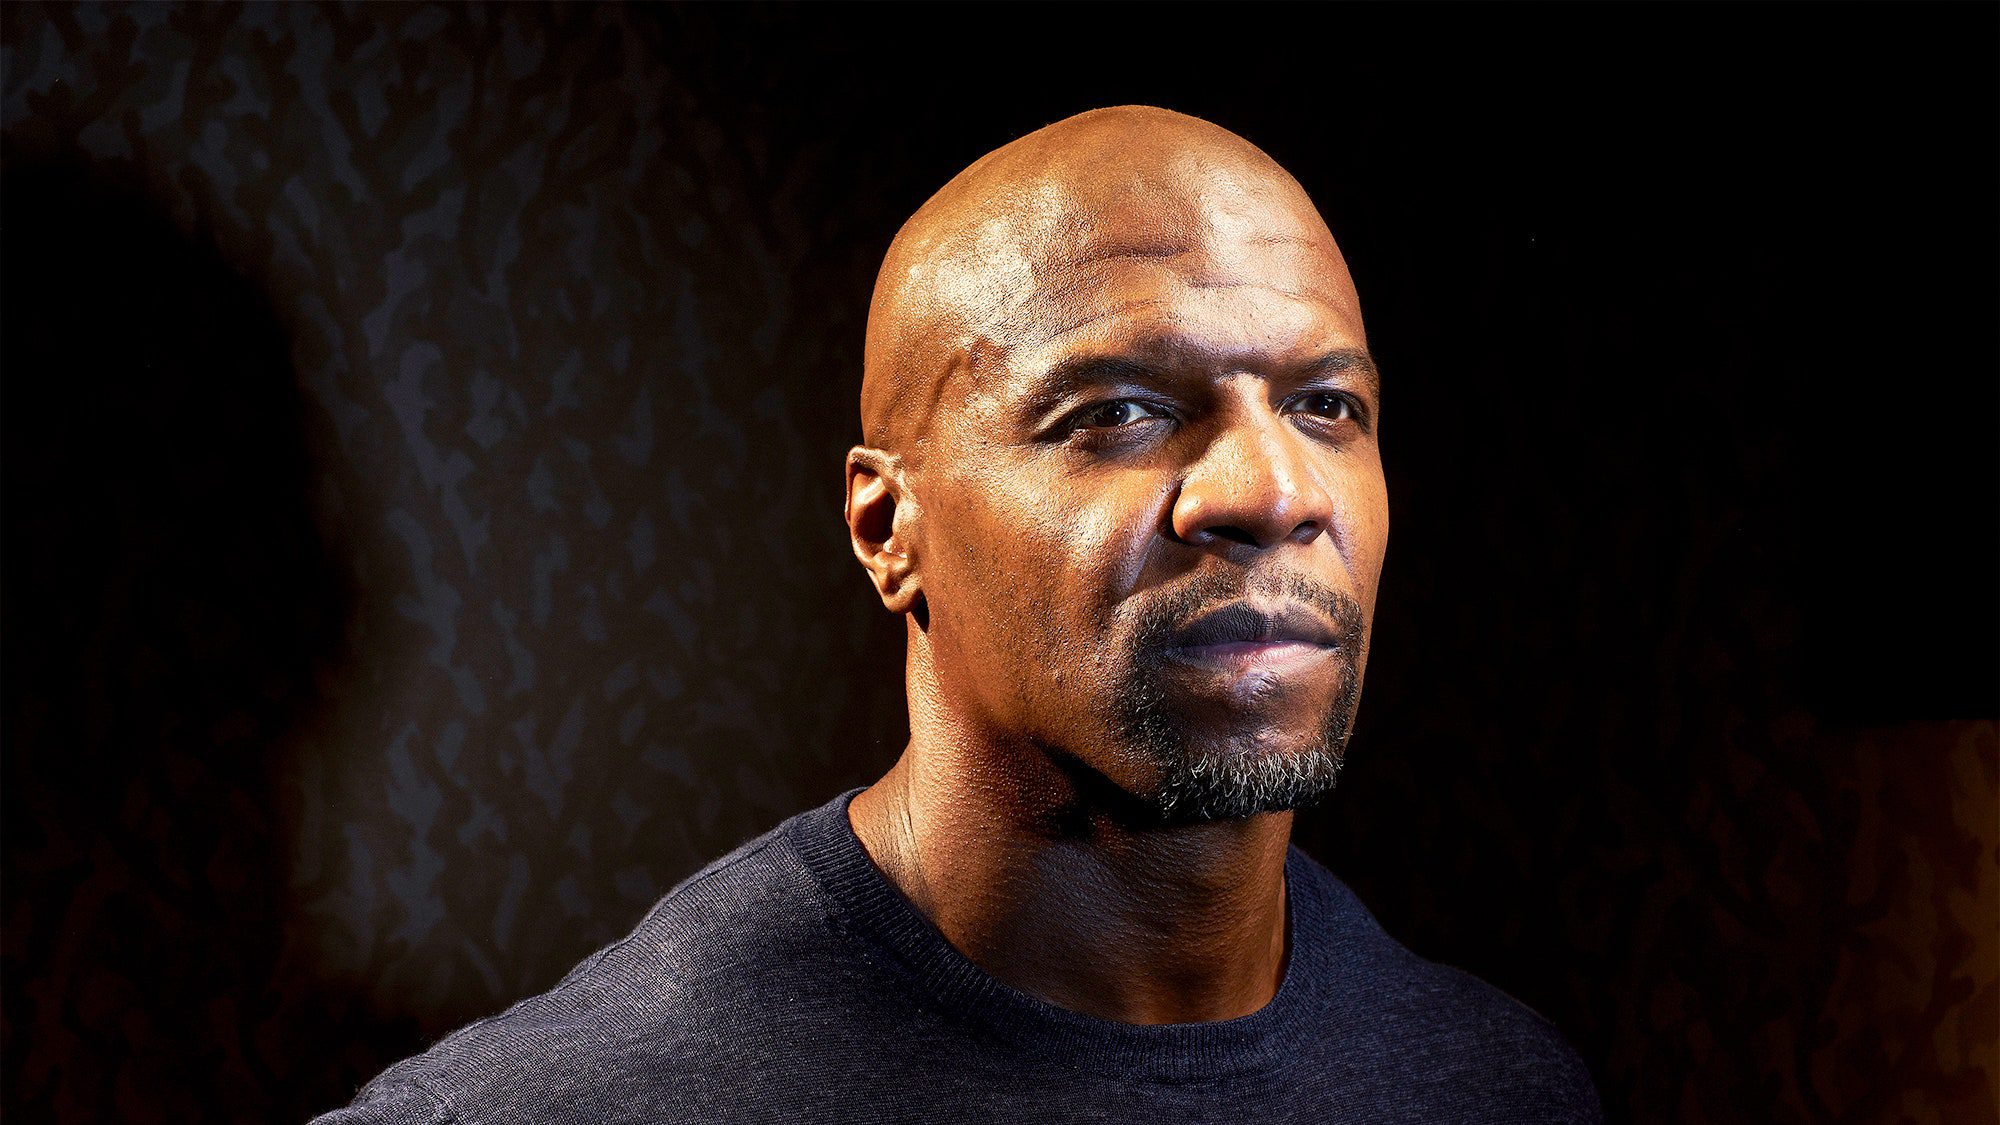 Terry Crews Net Worth: Former NFL Player Earnings